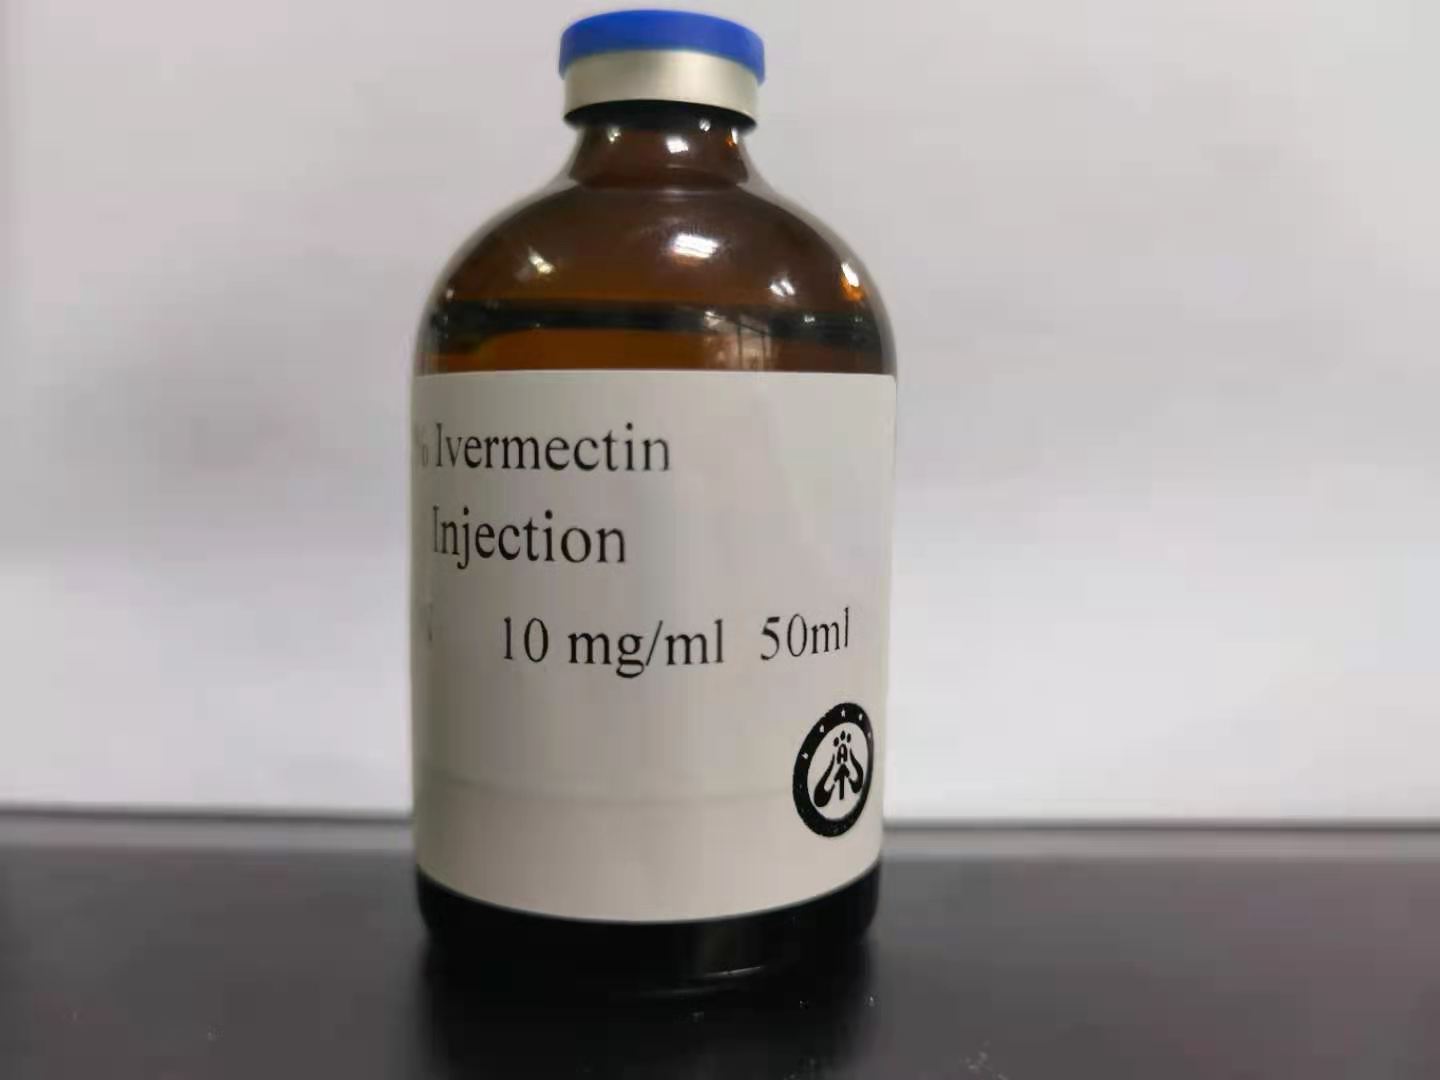 Buy High Quality Ivermectin Injection, Ivermectin Solution or Ciprofloxacin Hydrochloride Injection in Bulk